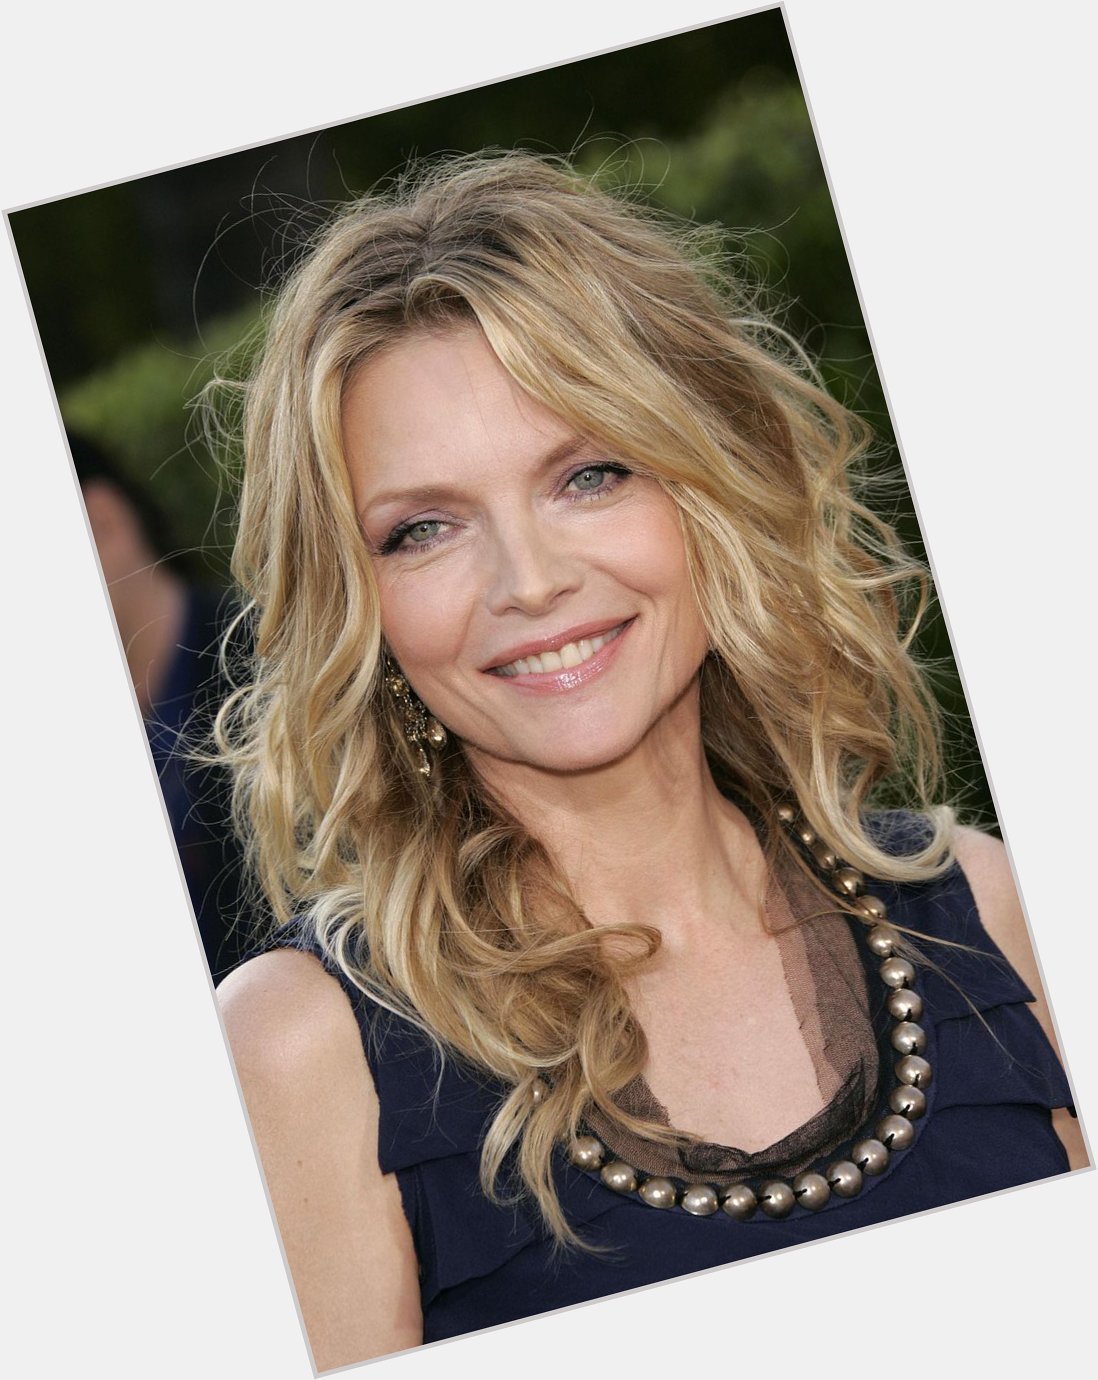 Happy Birthday to Michelle Pfeiffer, who turns 59 today! 